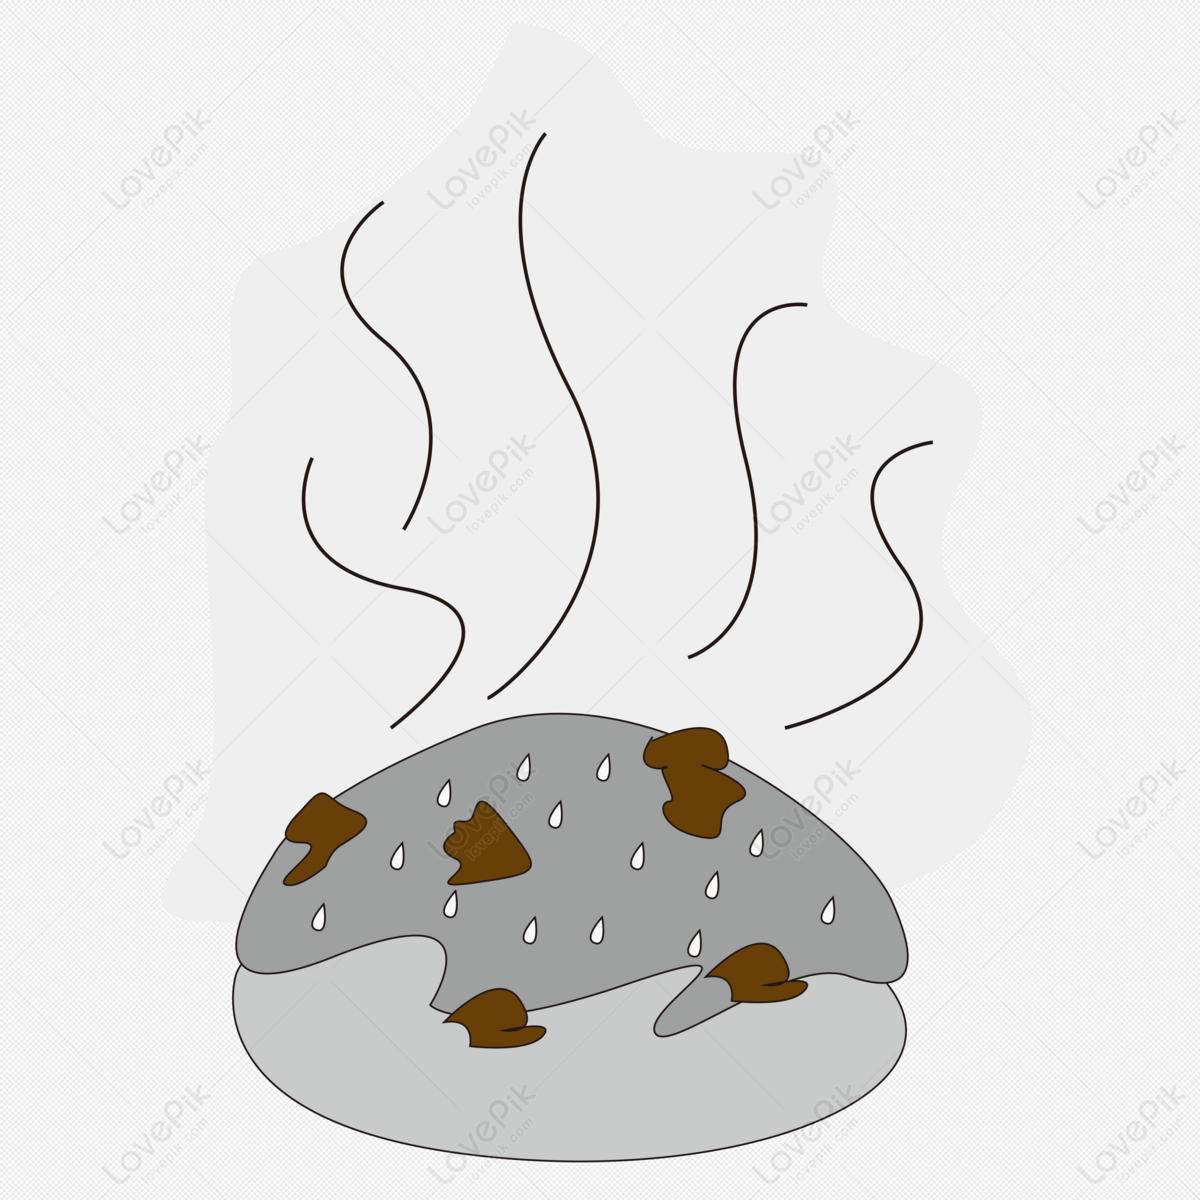 expired food clipart no background